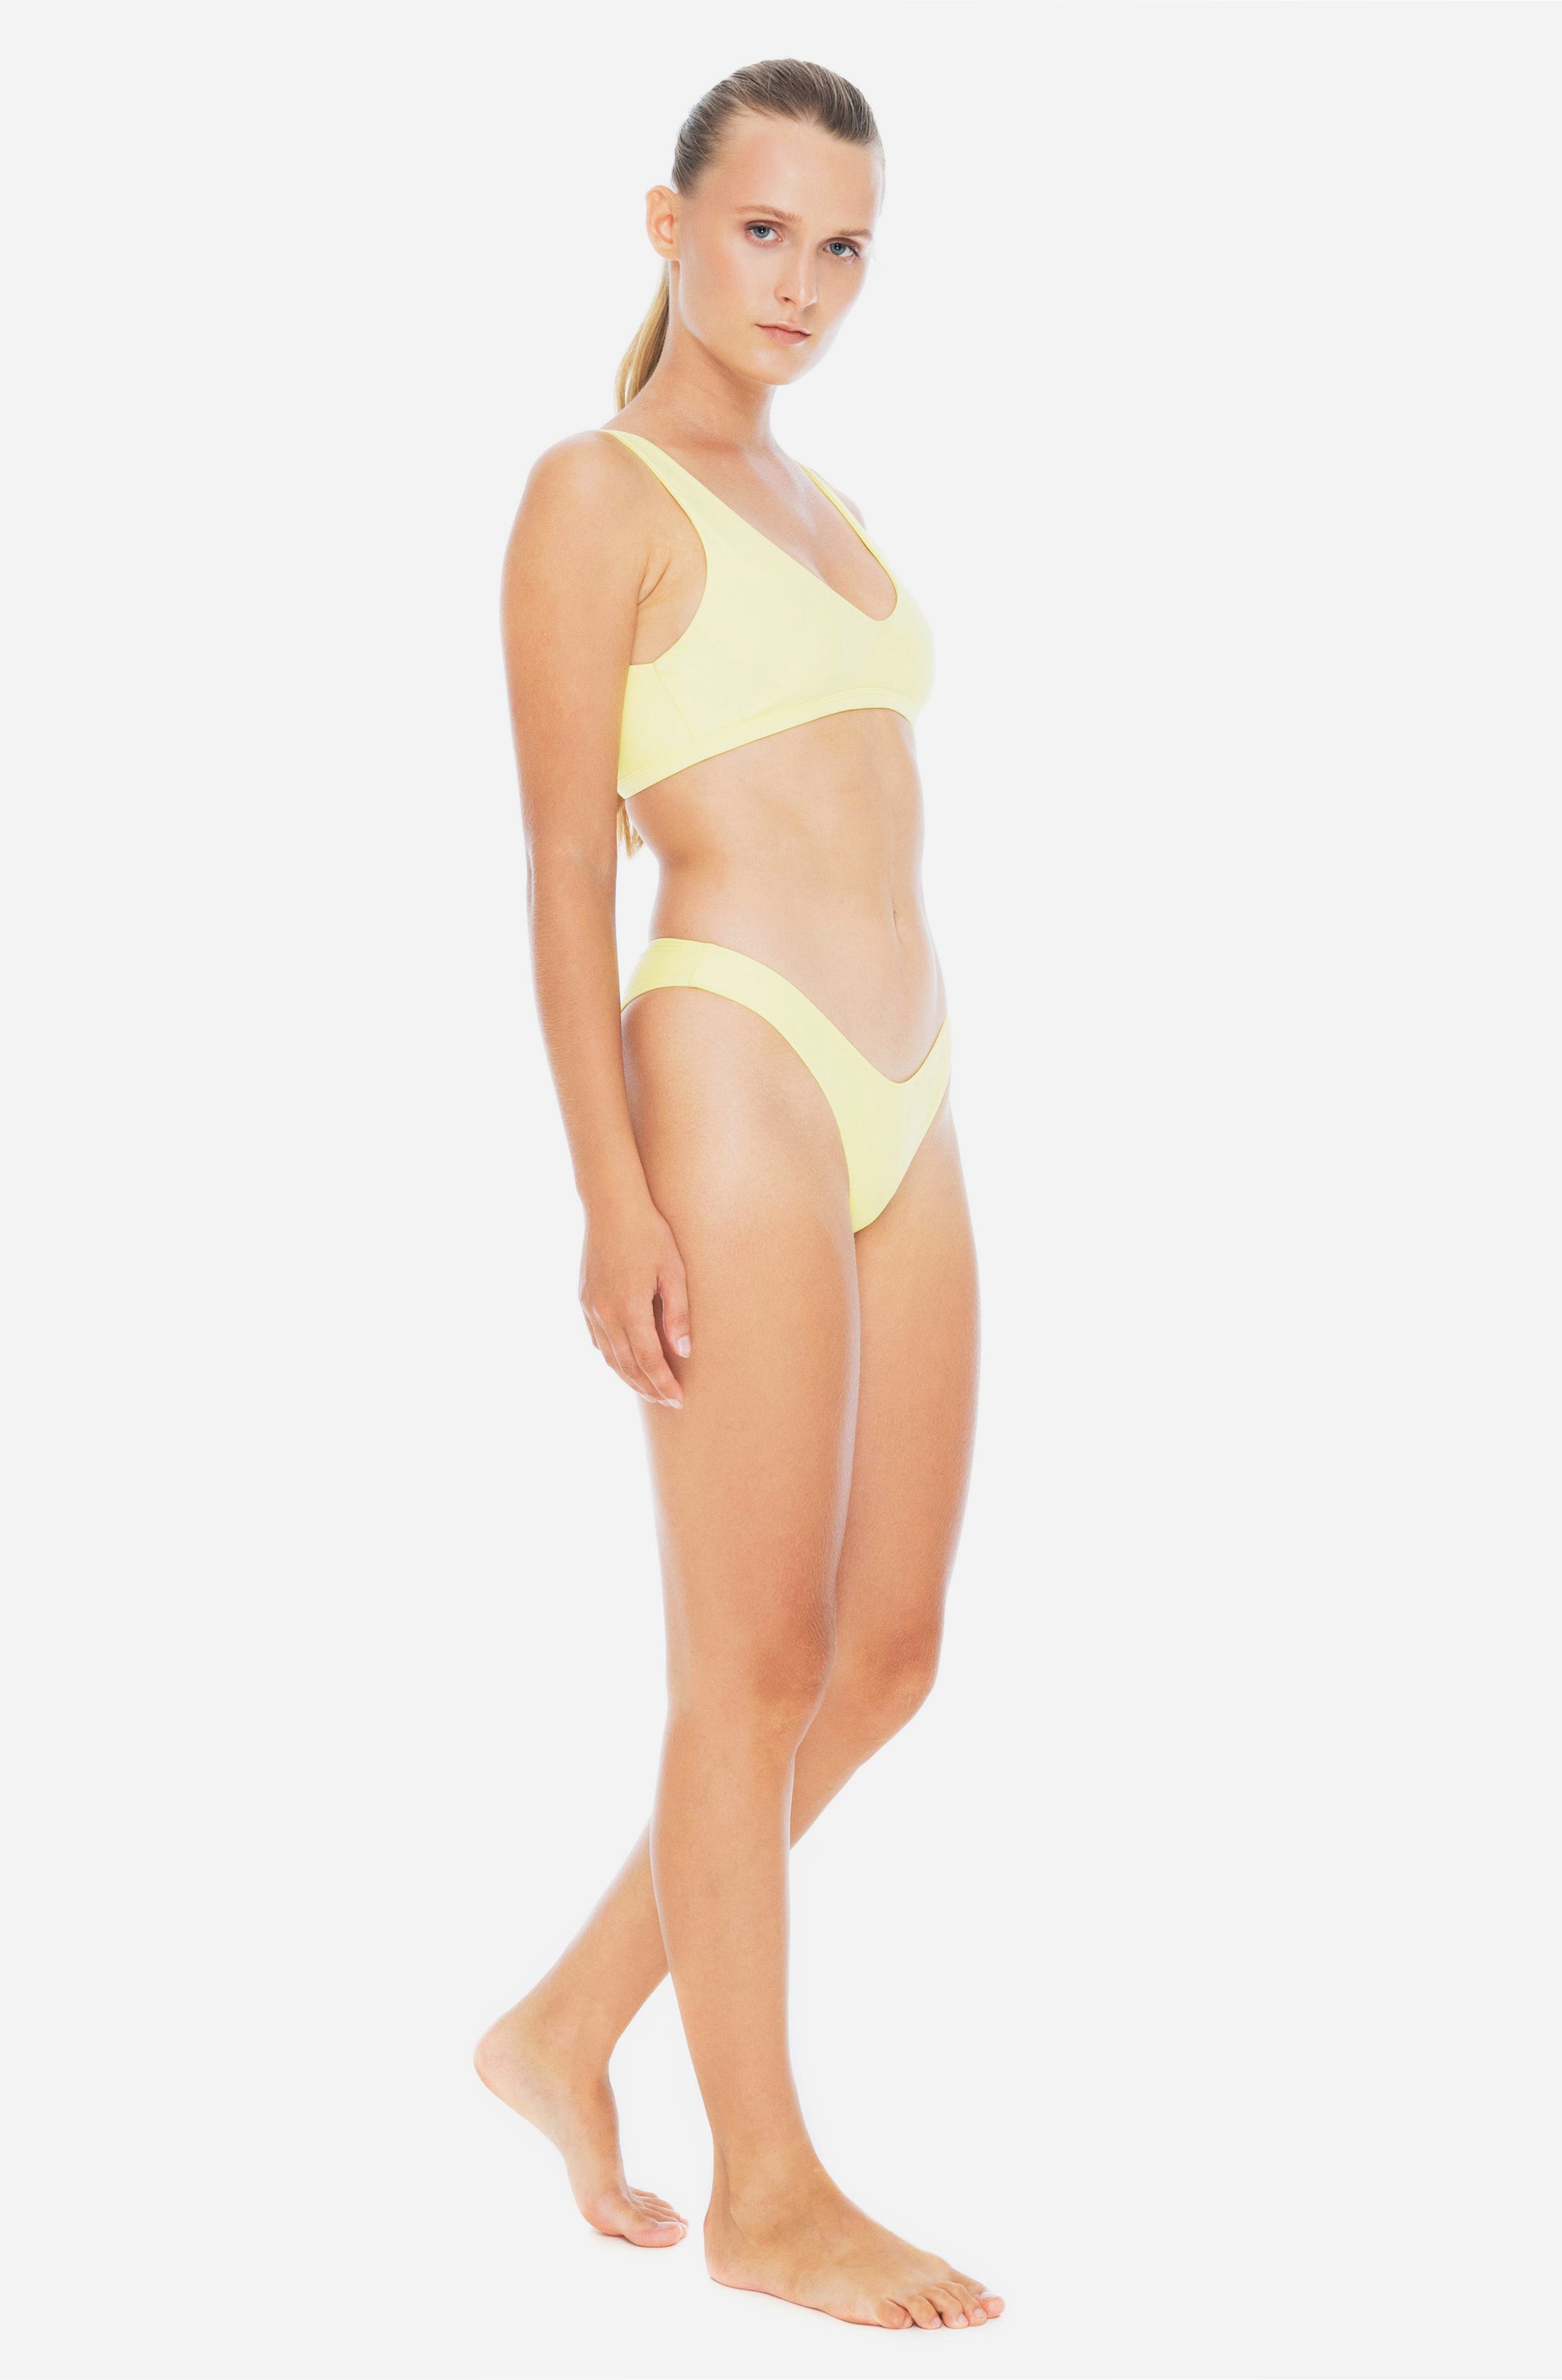 Front view of a woman modelling a surf bikini top and a surf bikini bottom in sunflower yellow.